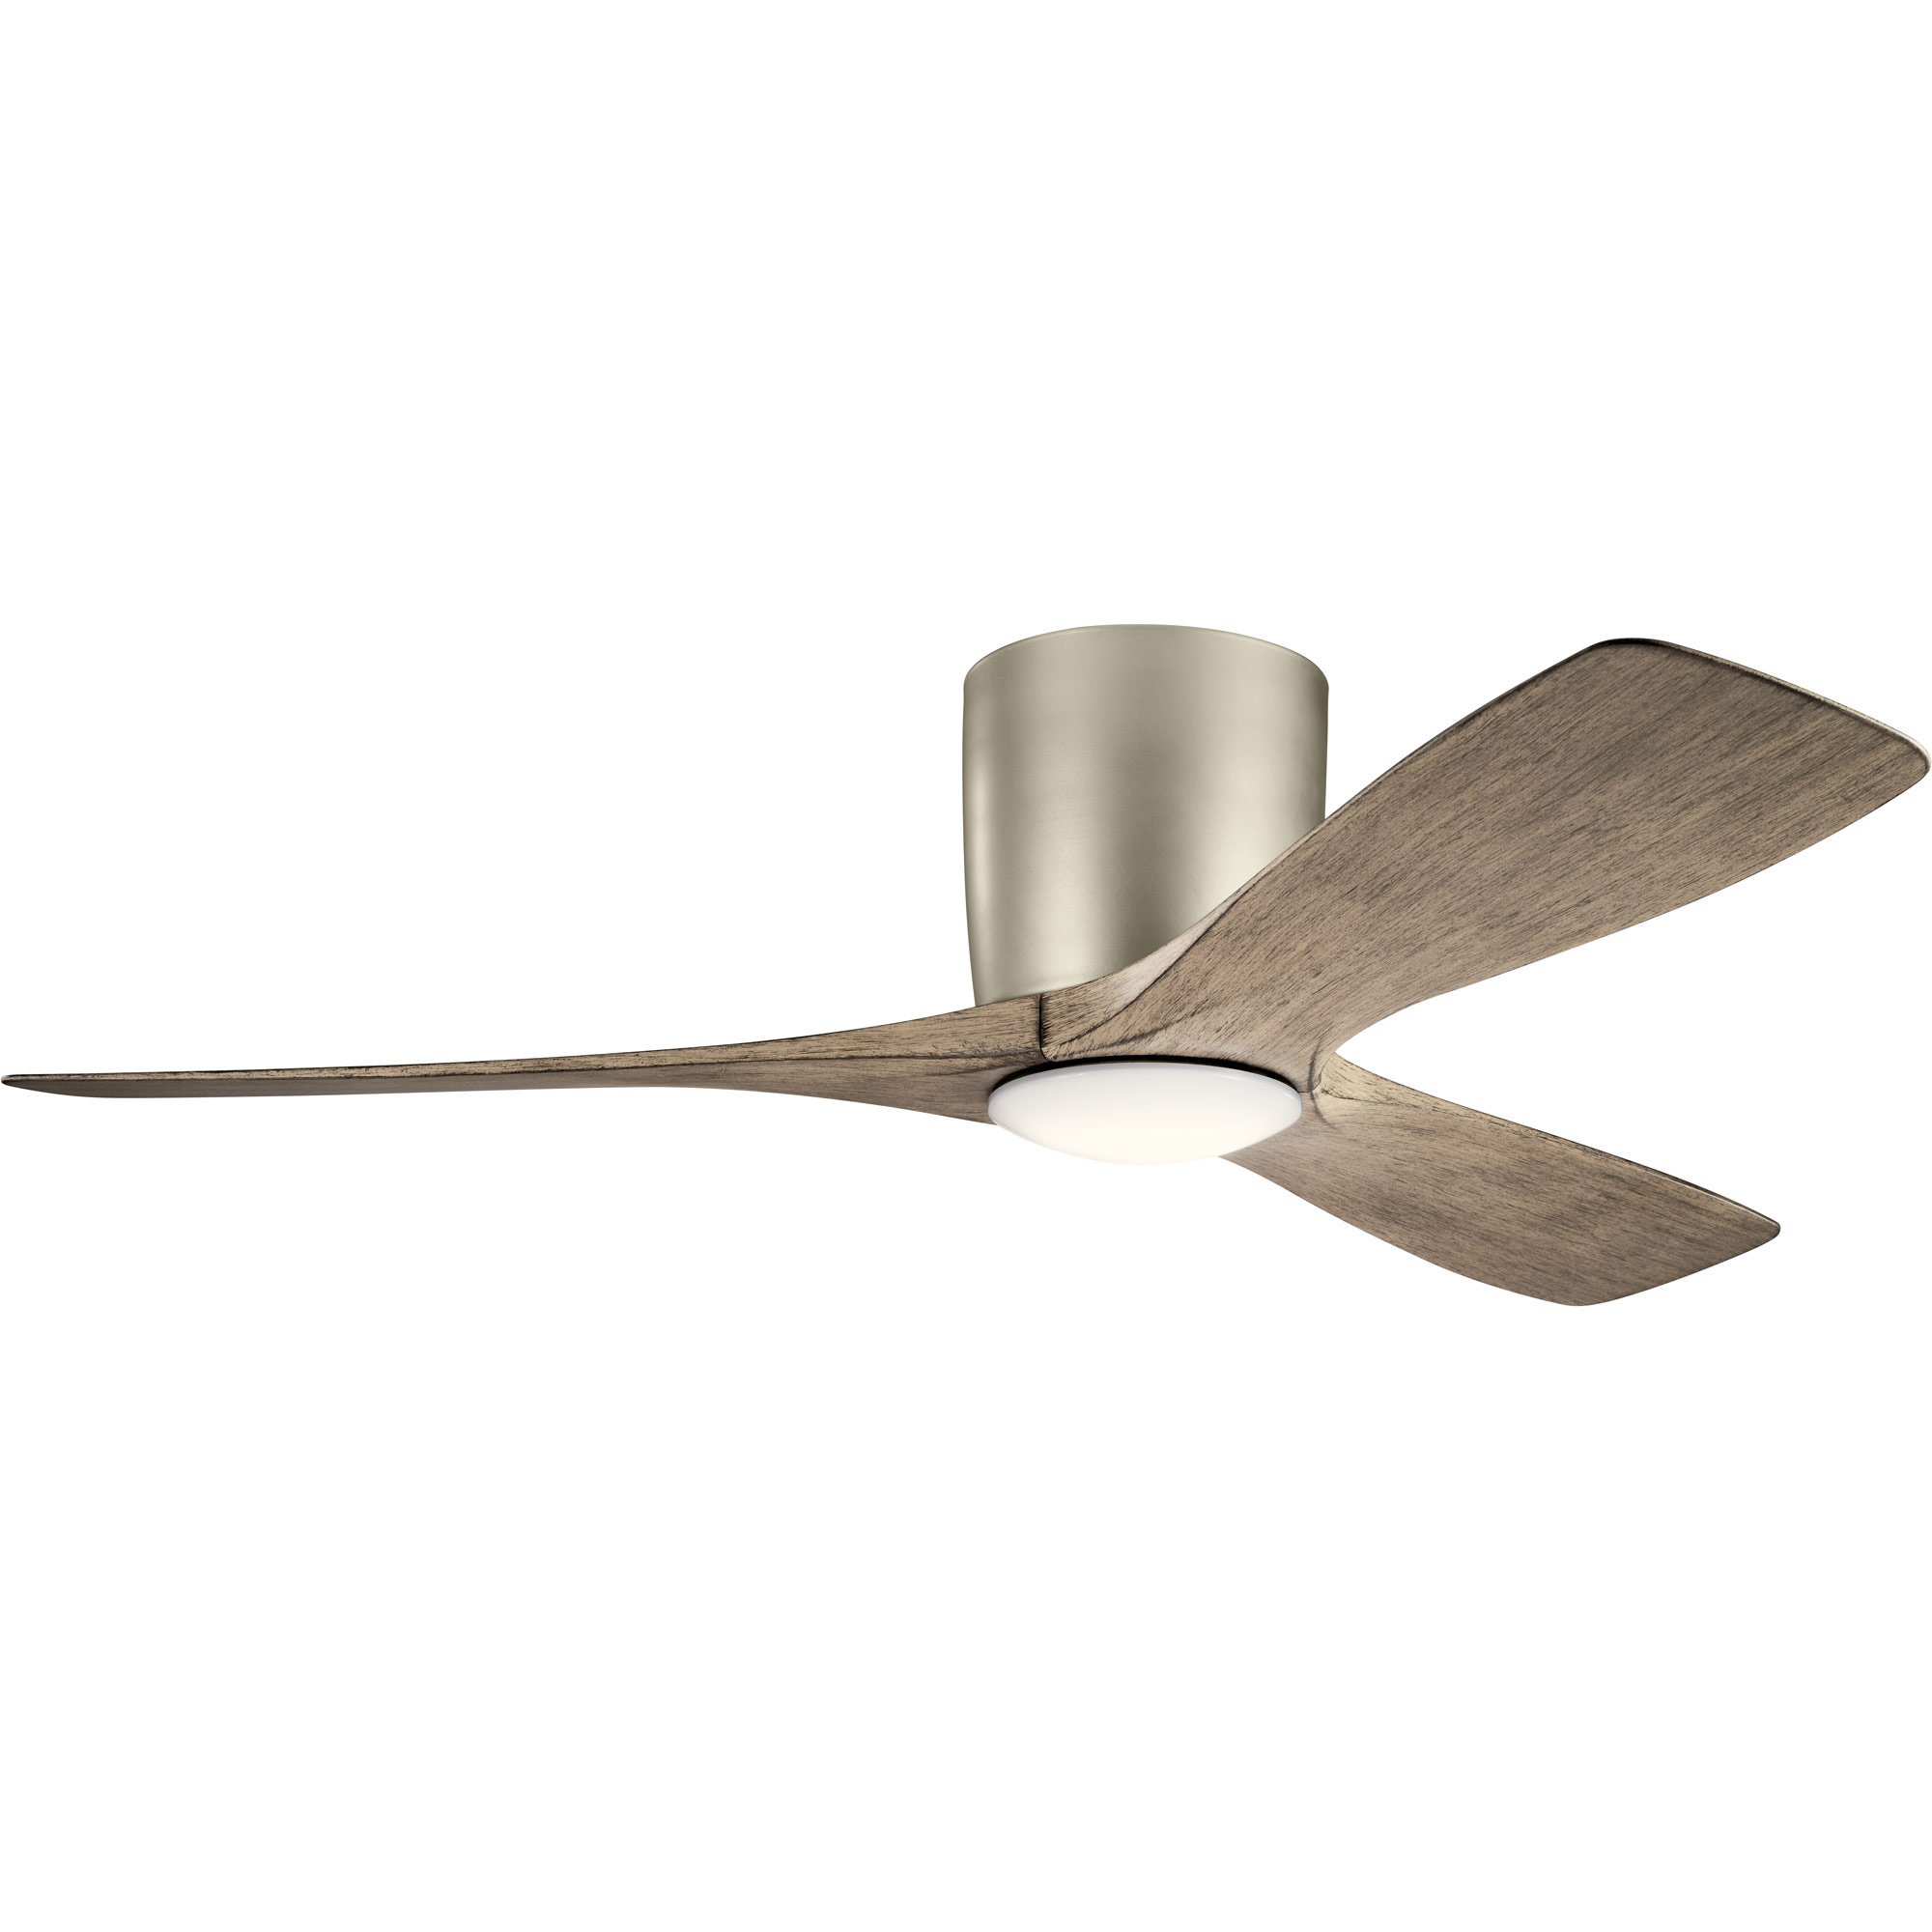 Volos Ceiling Fan With Light By Kichler, How To Install Kichler Ceiling Fan